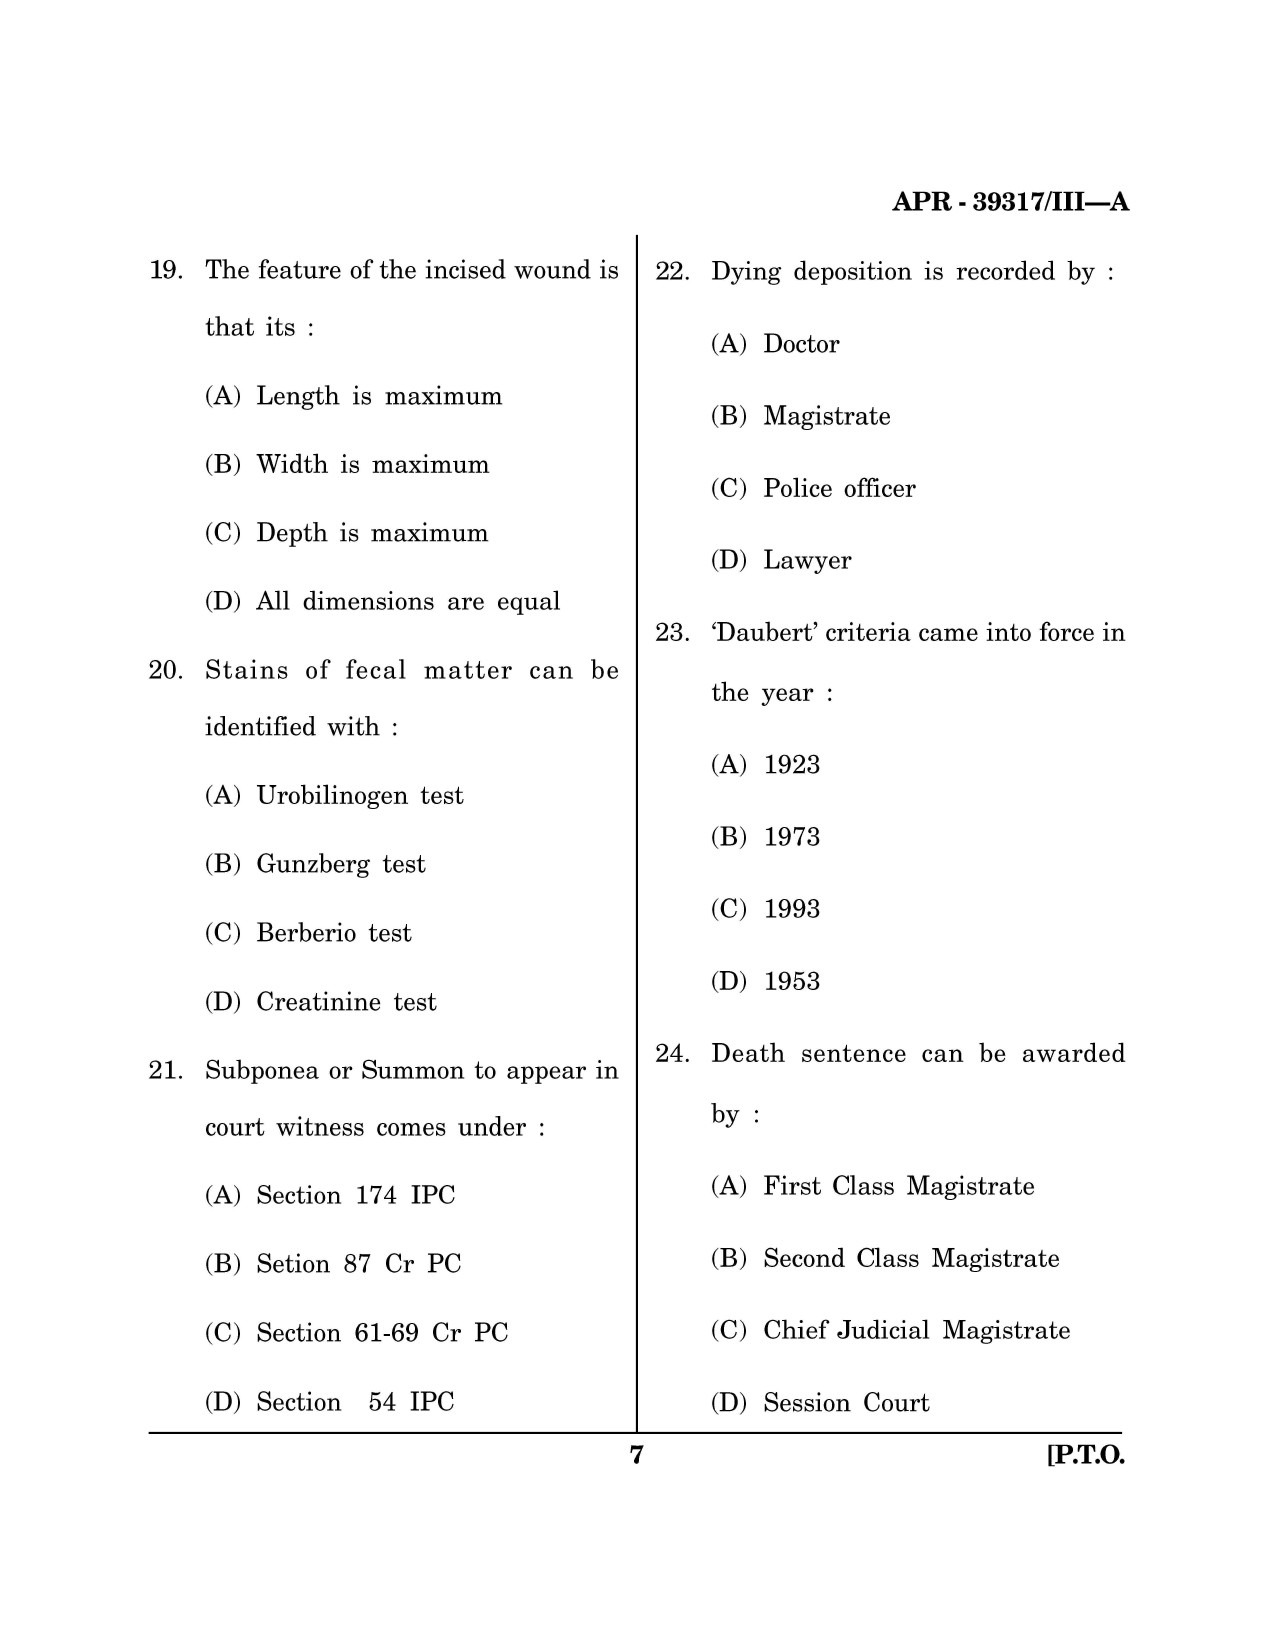 Maharashtra SET Forensic Science Question Paper III April 2017 6